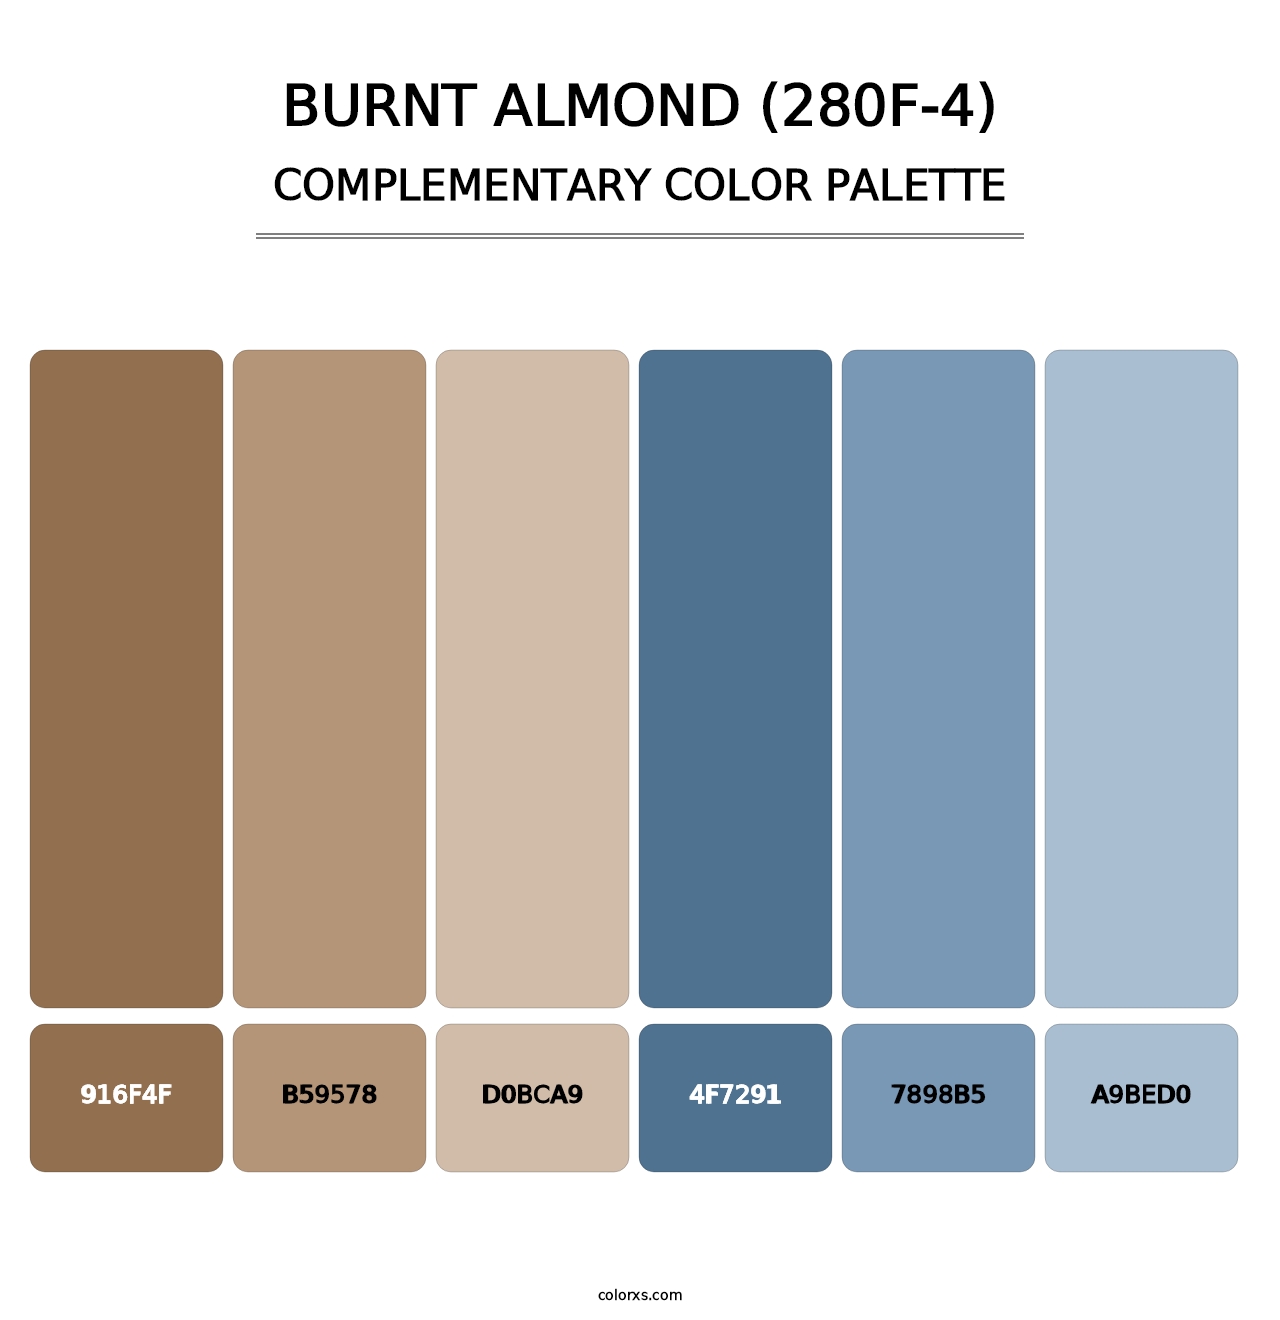 Burnt Almond (280F-4) - Complementary Color Palette